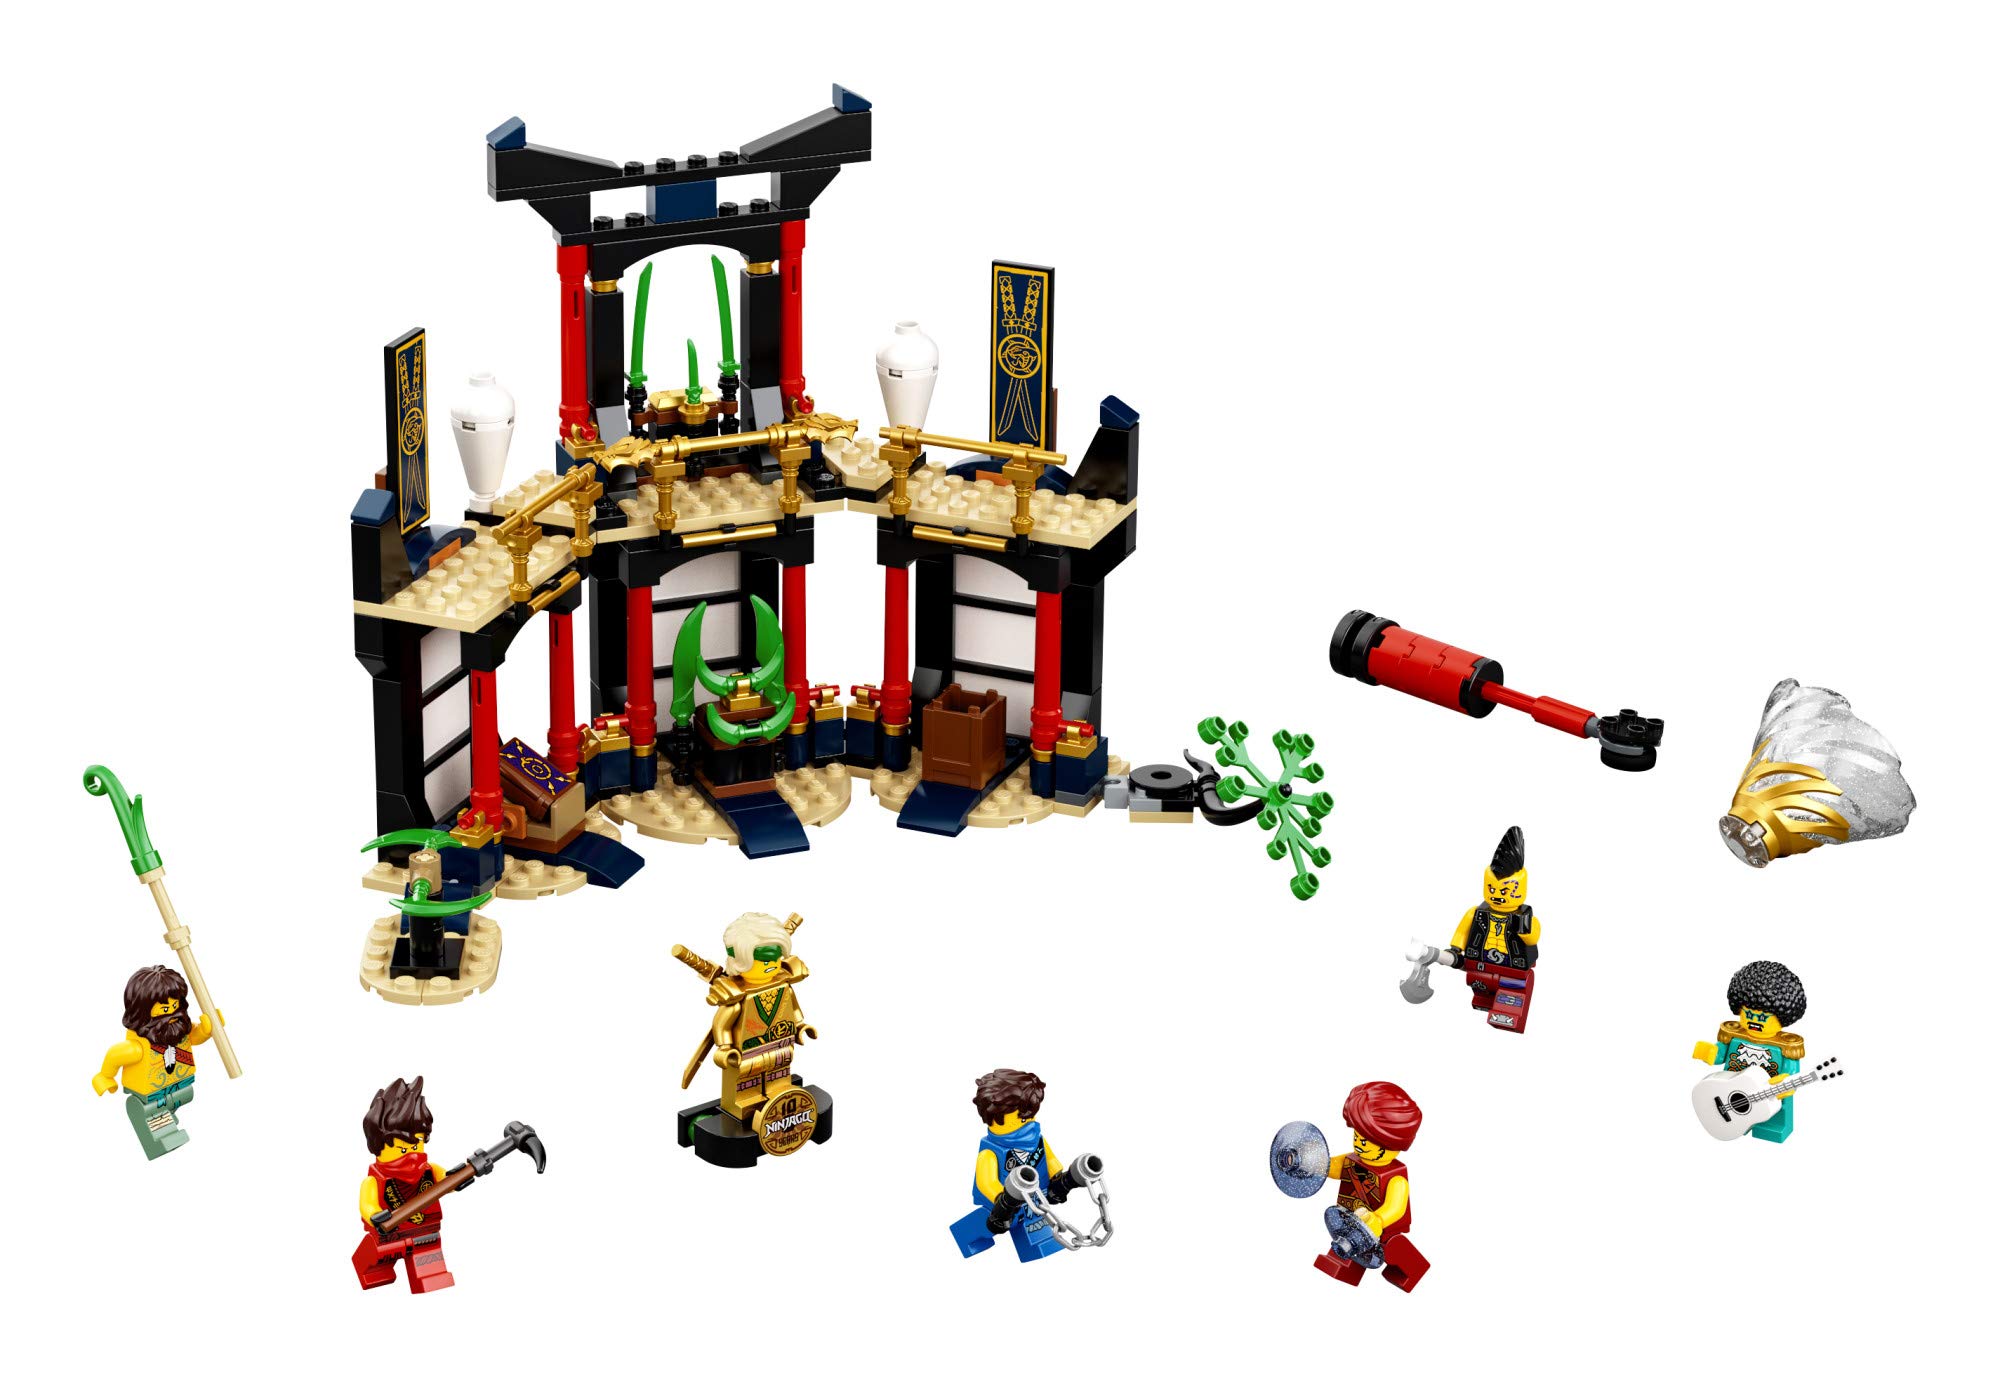 LEGO NINJAGO Legacy Tournament of Elements 71735 Temple Toy Building Set Featuring Ninja Minifigures, New 2021 (283 Pieces)